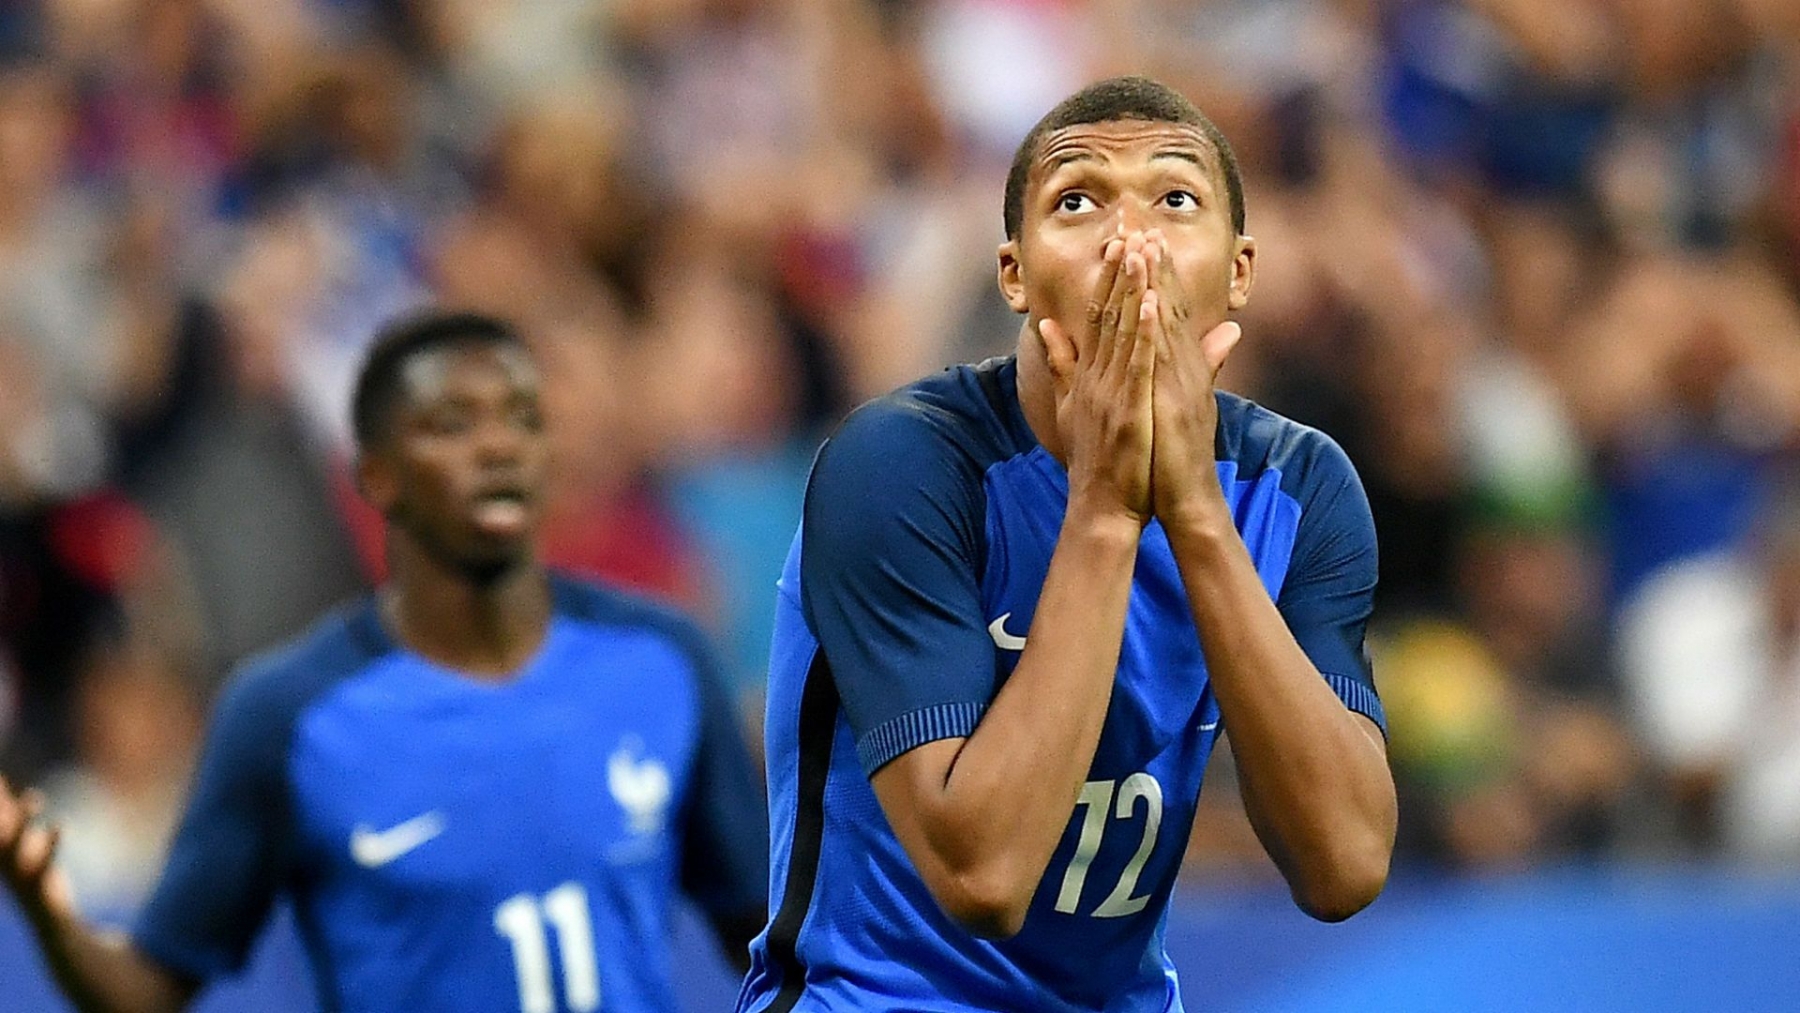 Kylian Mbappé 2019 France Wallpapers and Background Images | YL Computing